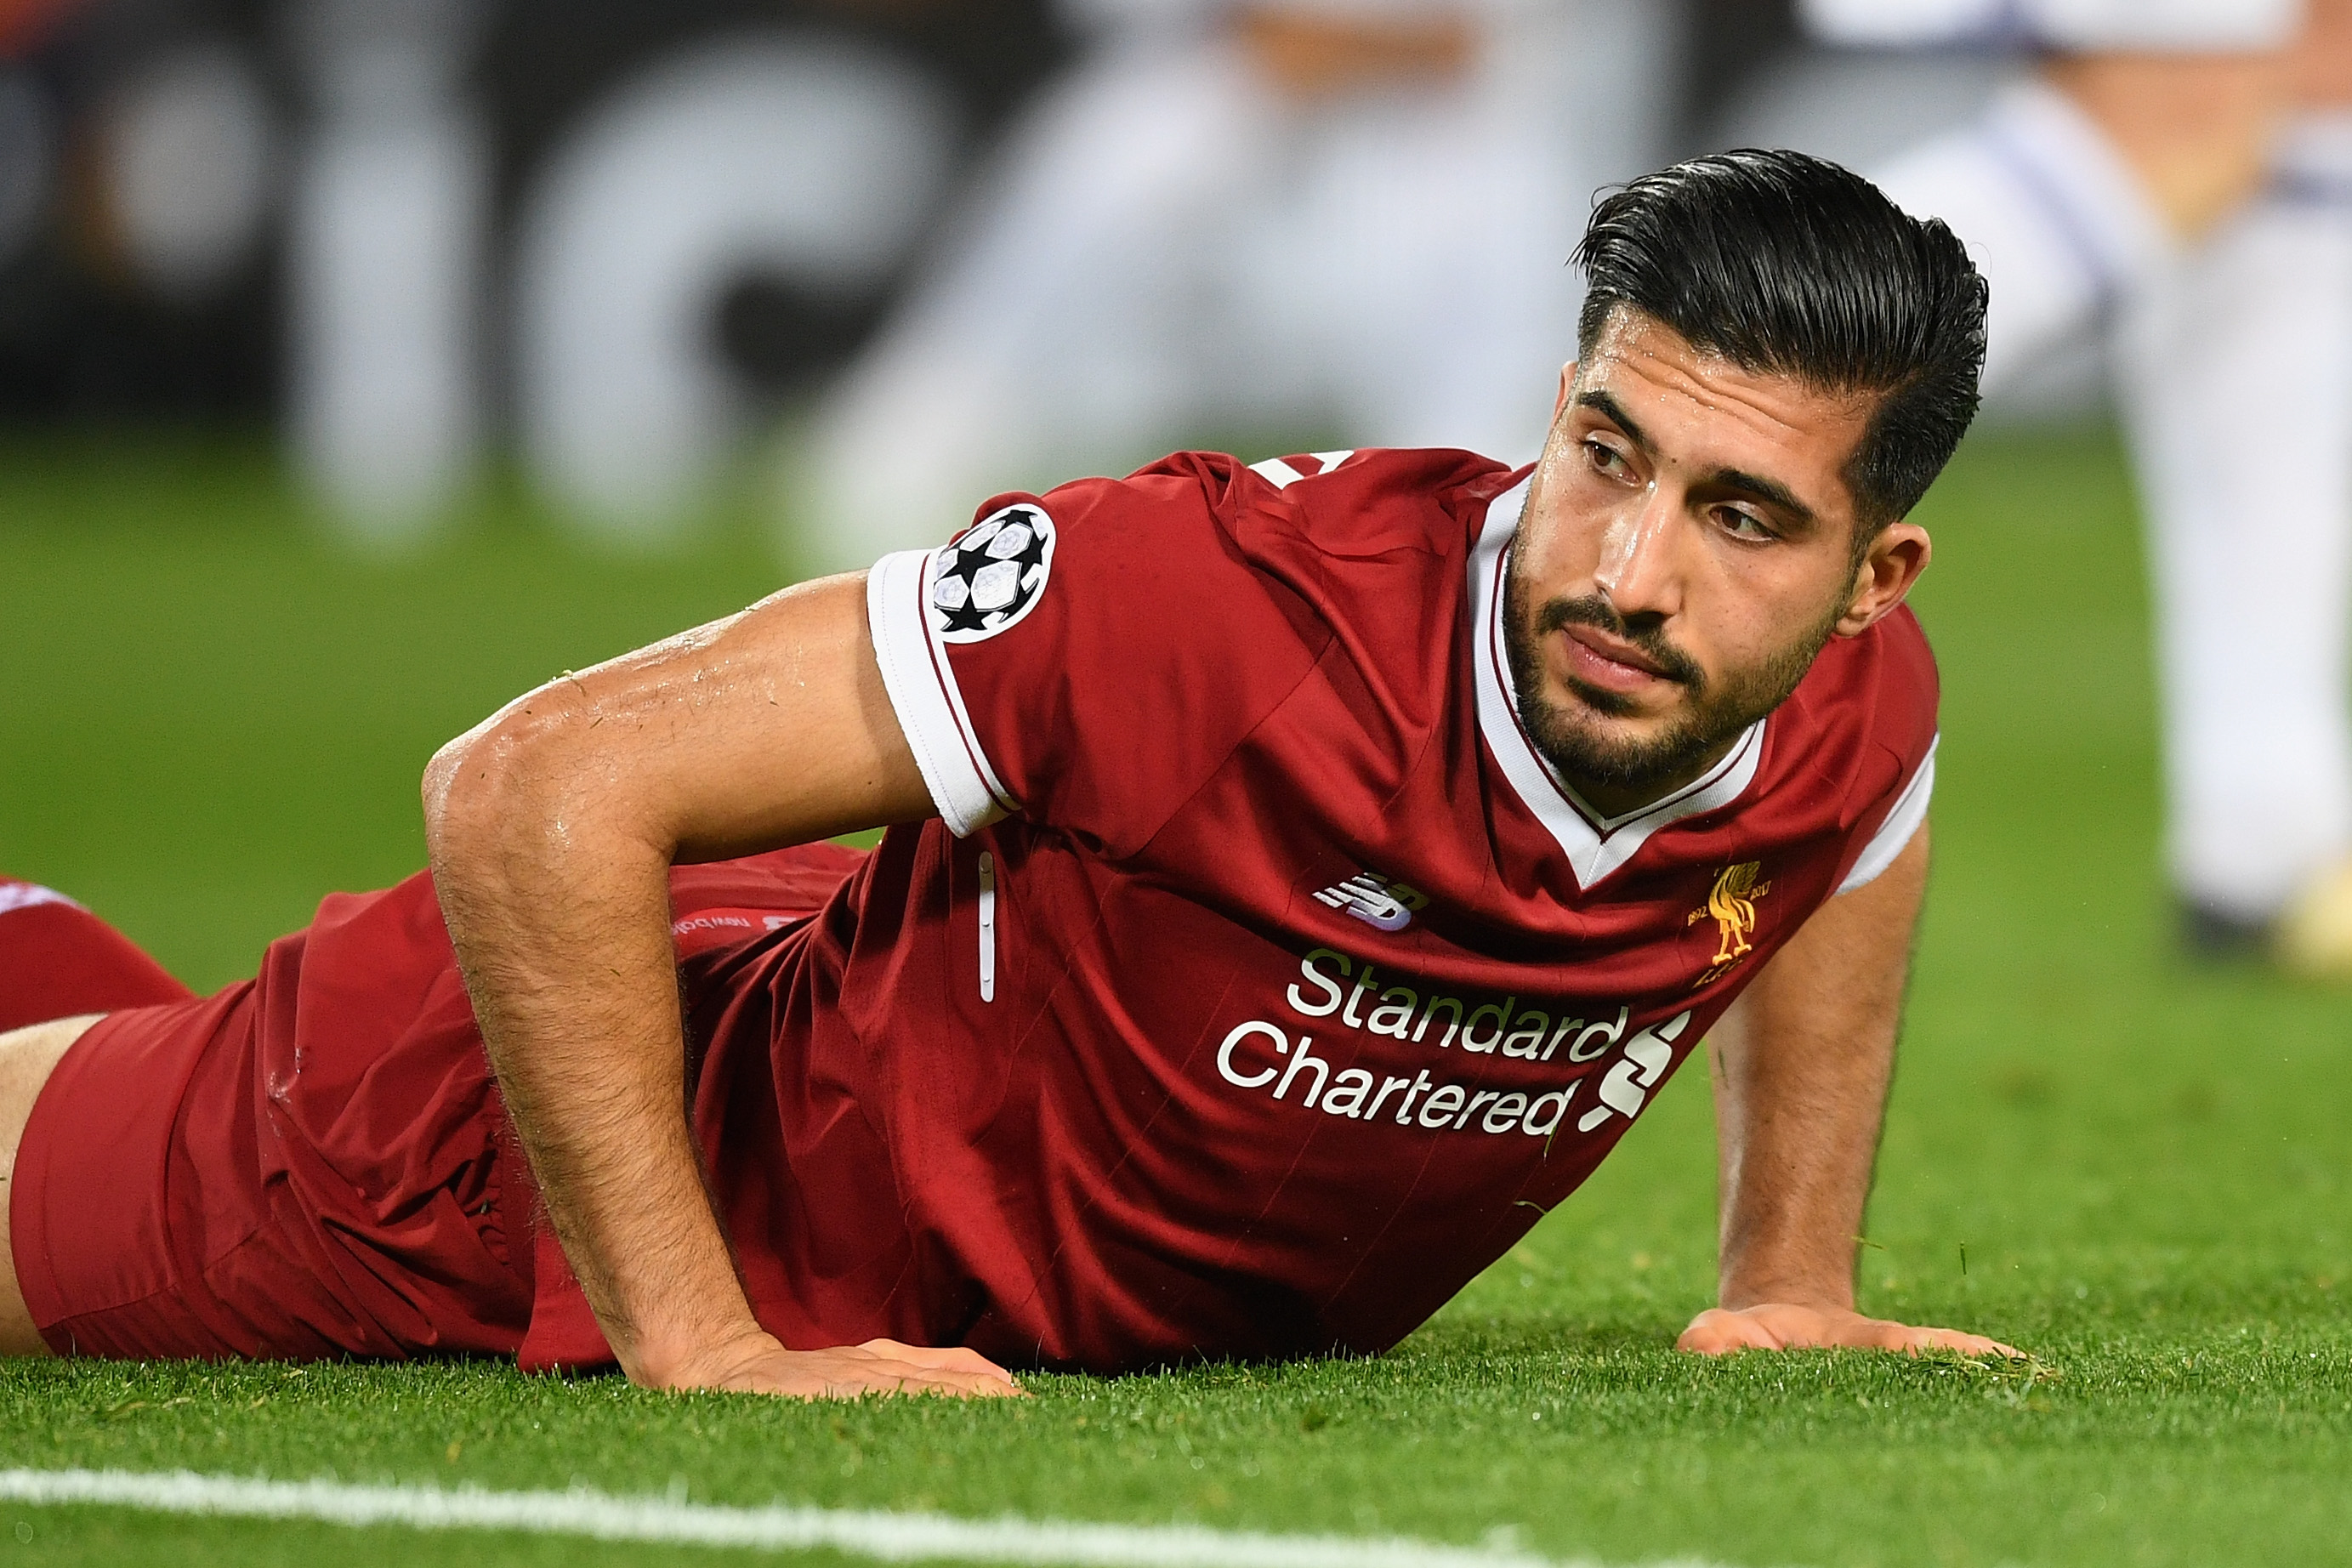 LIVERPOOL, ENGLAND - NOVEMBER 01:  Emre Can of Liverpool reacts during the UEFA Champions League group E match between Liverpool FC and NK Maribor at Anfield on November 1, 2017 in Liverpool, United Kingdom.  (Photo by Michael Regan/Getty Images)